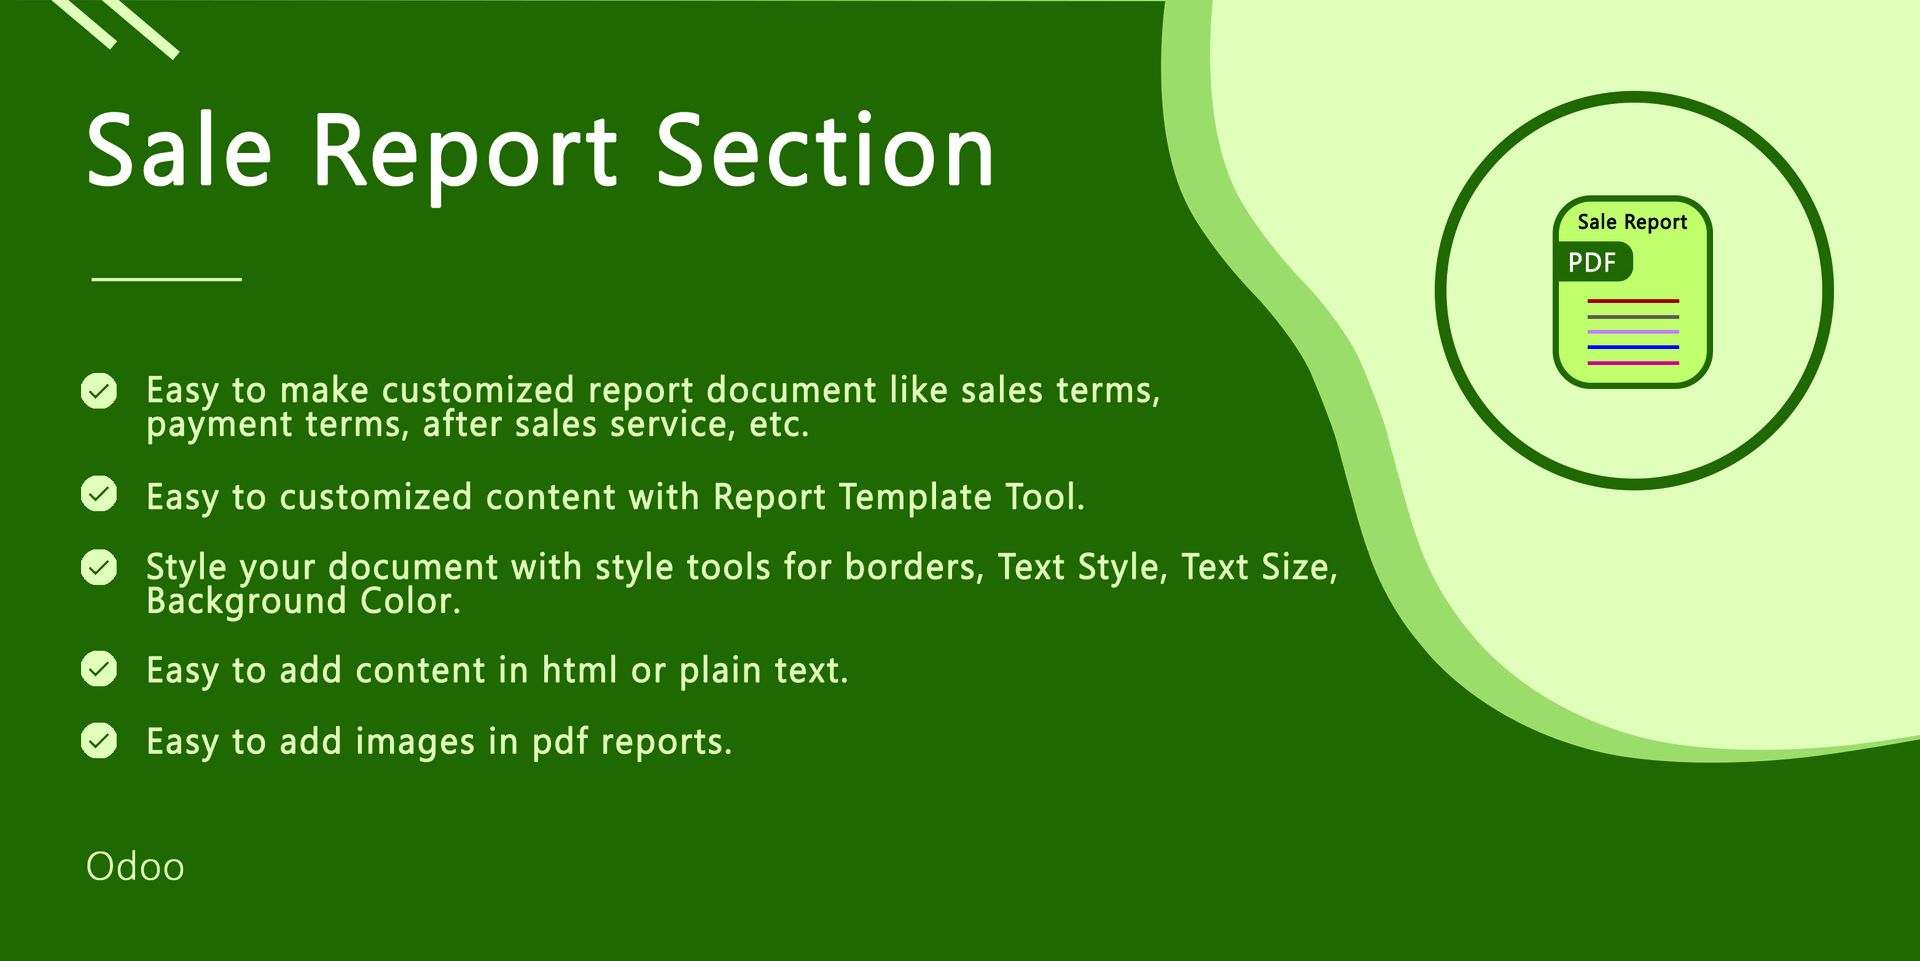 Sale Reprot Section